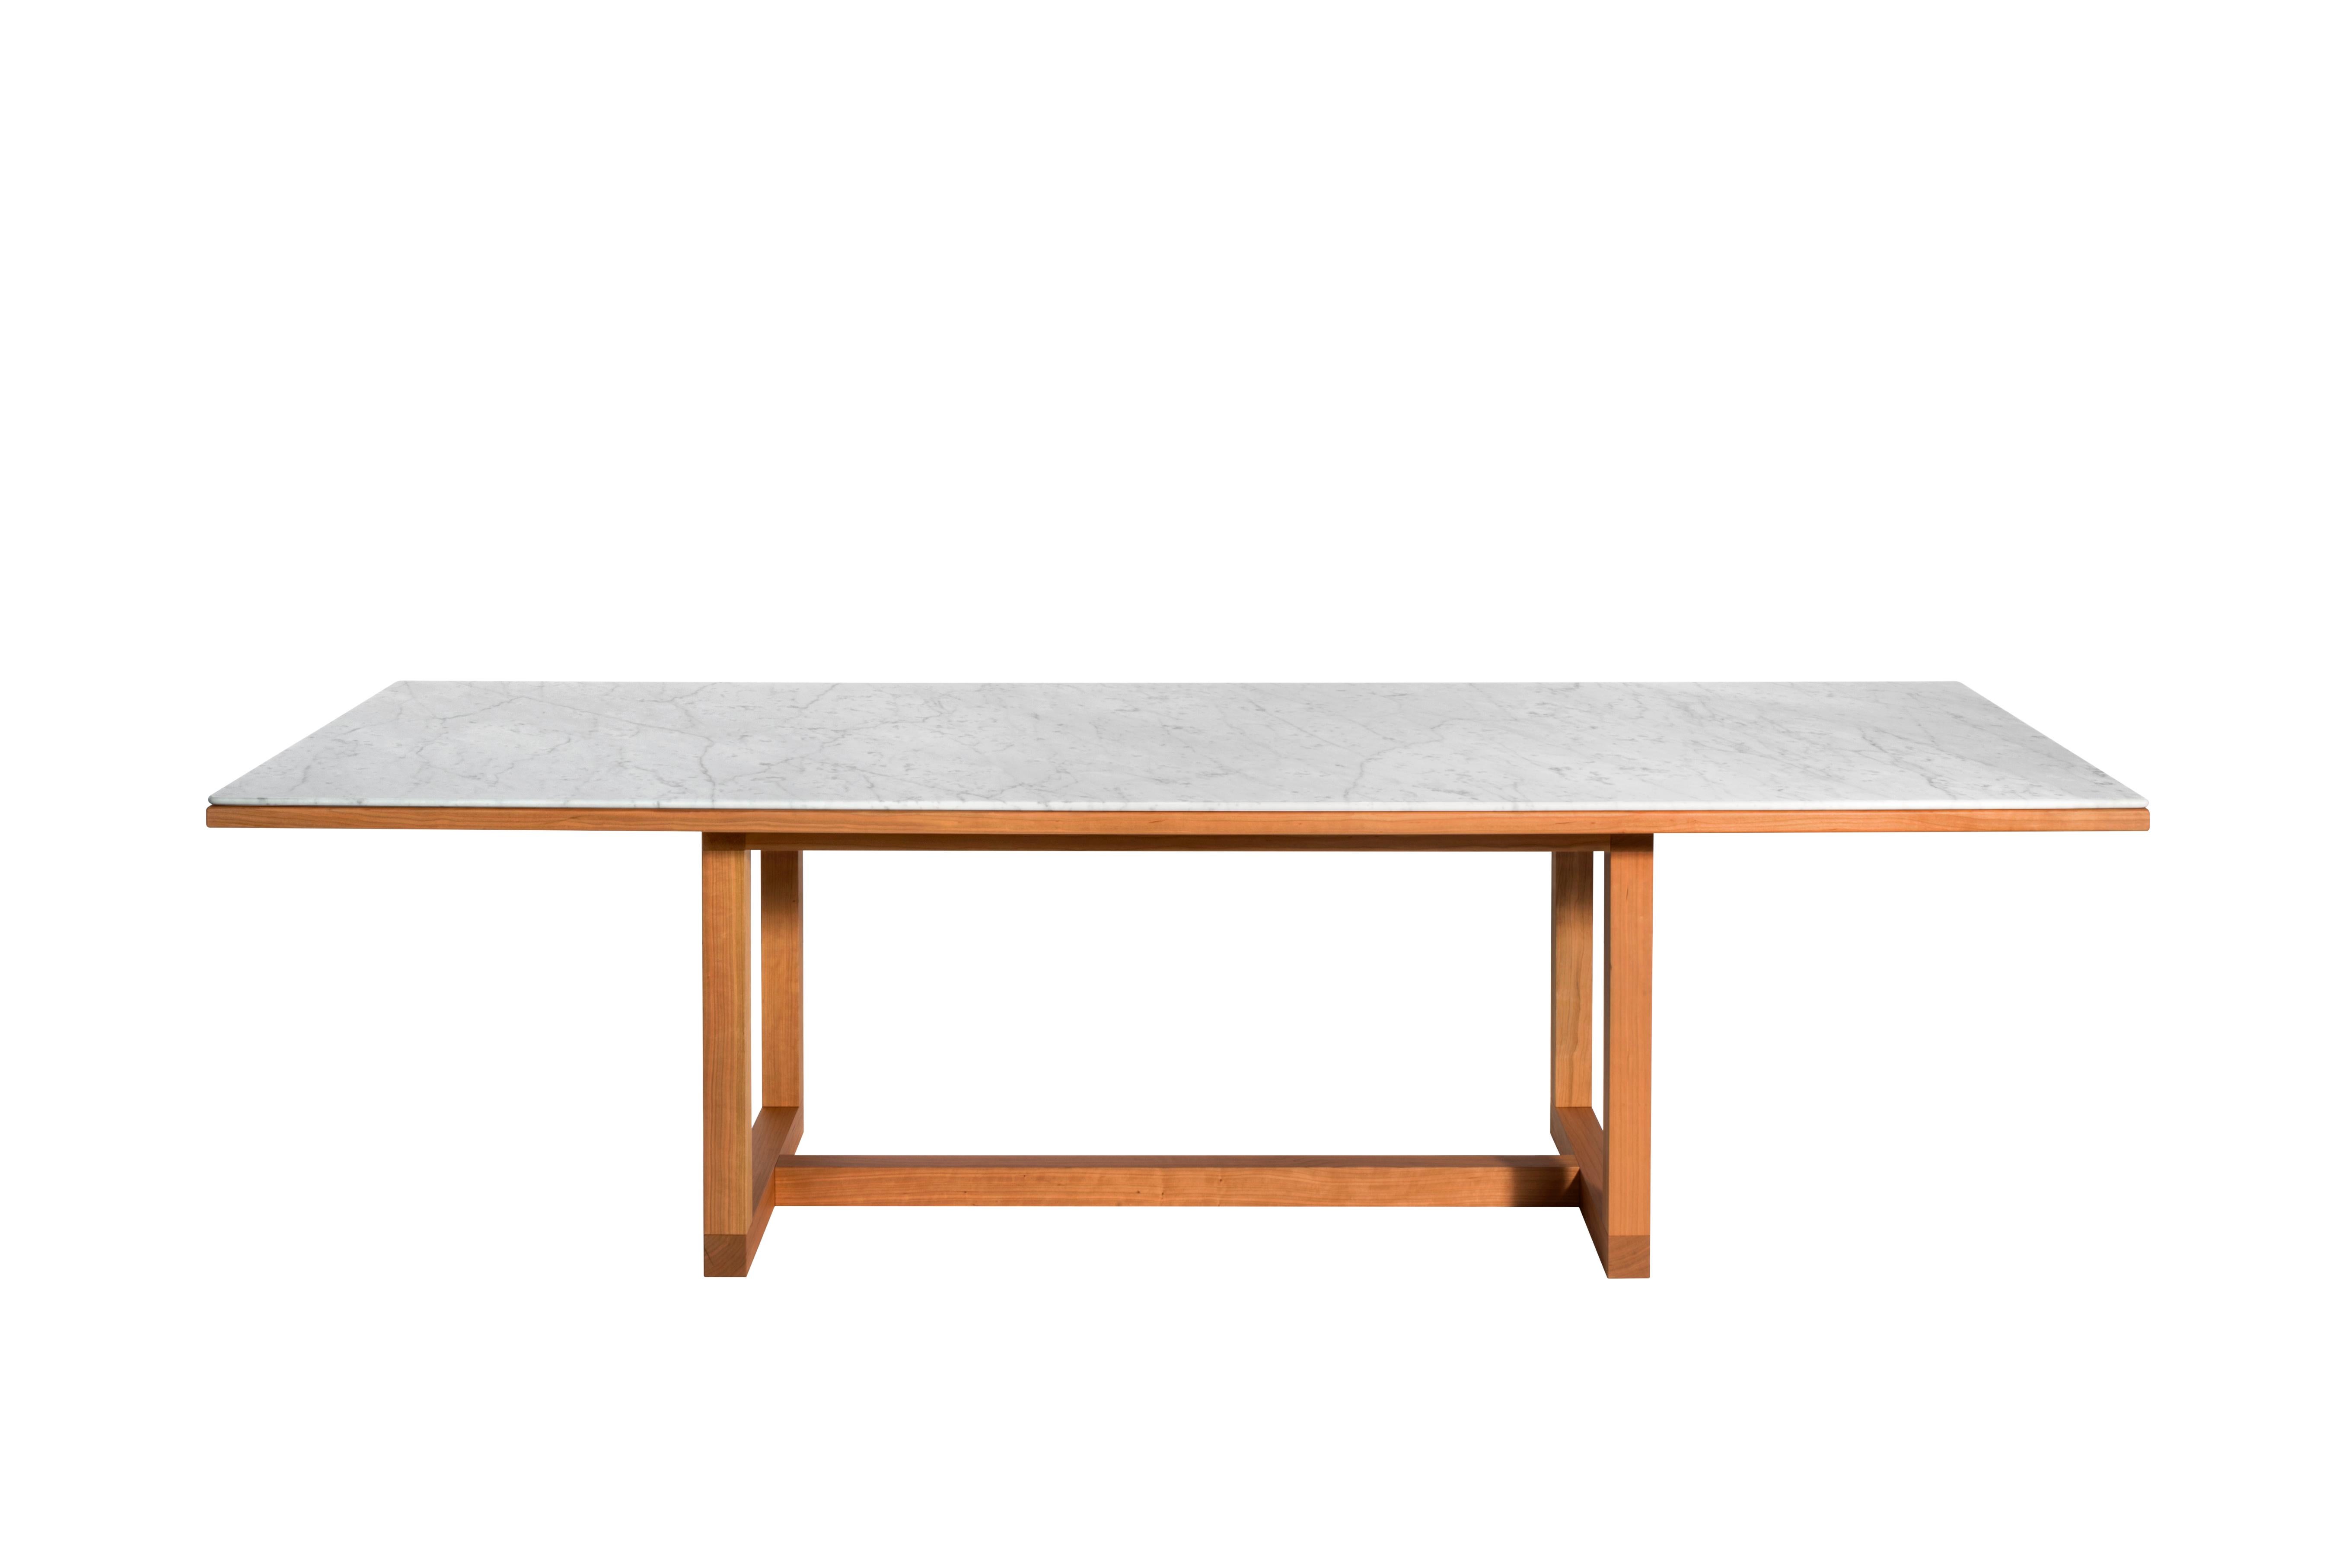 Salvatori Span Dining Table in Bianco Carrara and Cherrywood by John Pawson For Sale